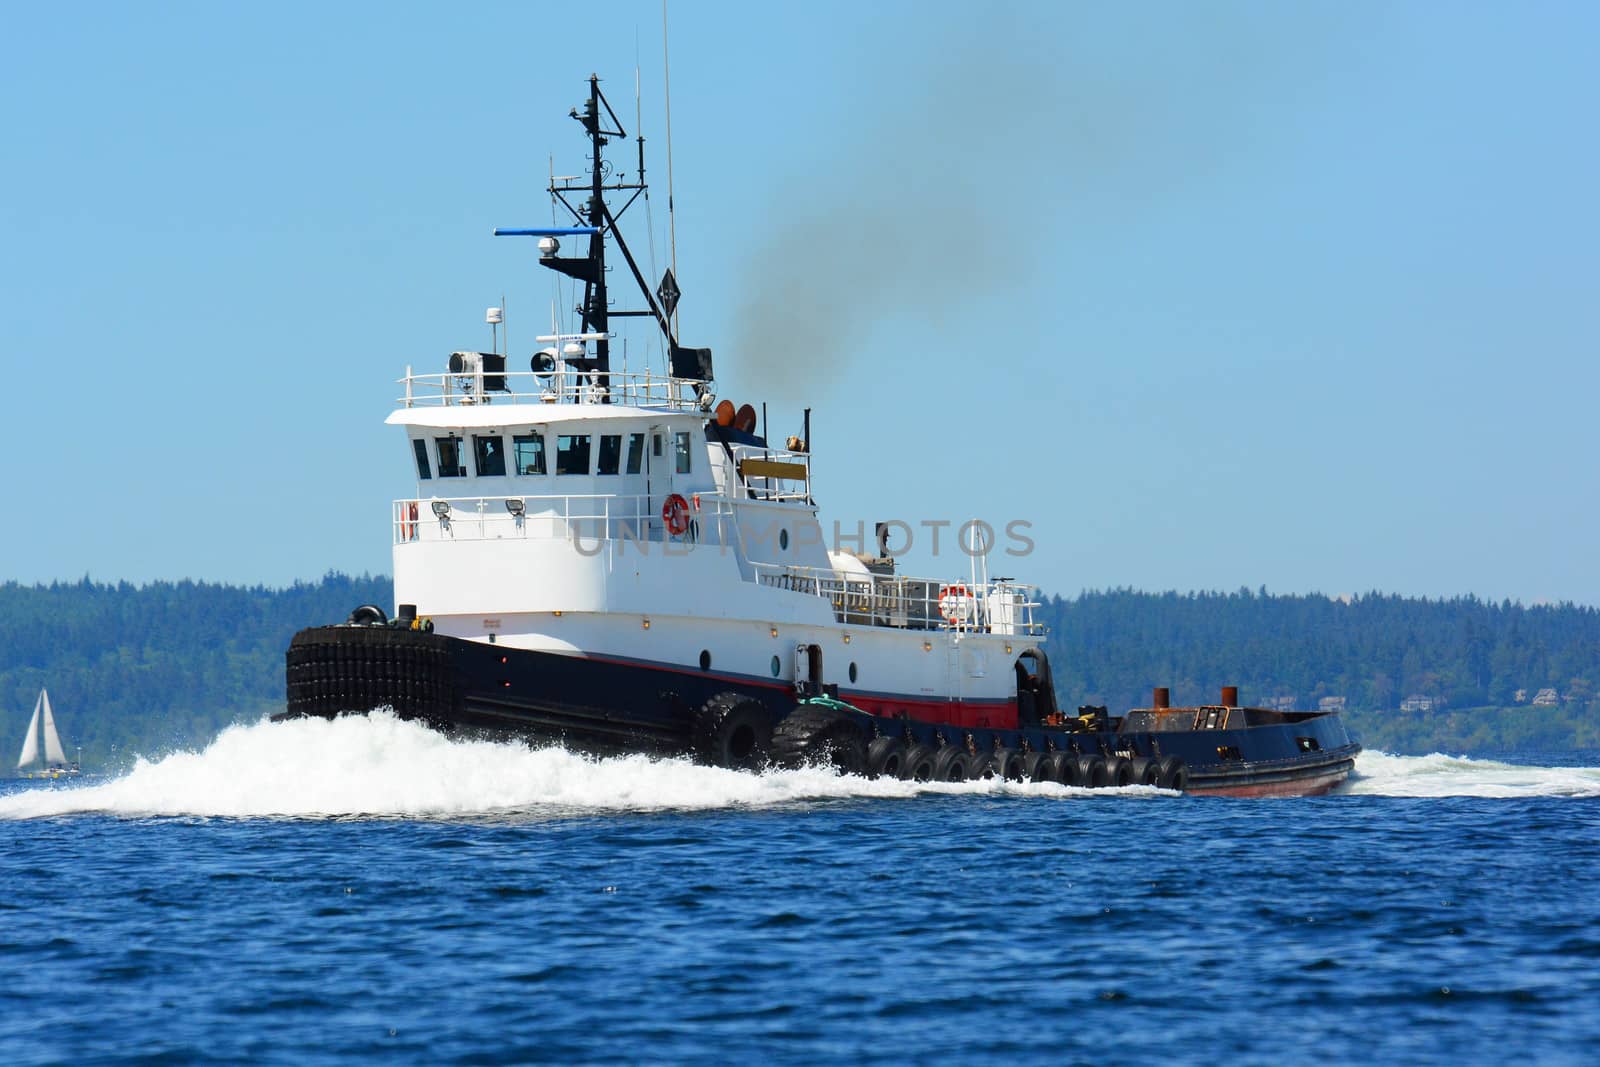 Ocean Going Tug Underway on Puget Sound by cestes001